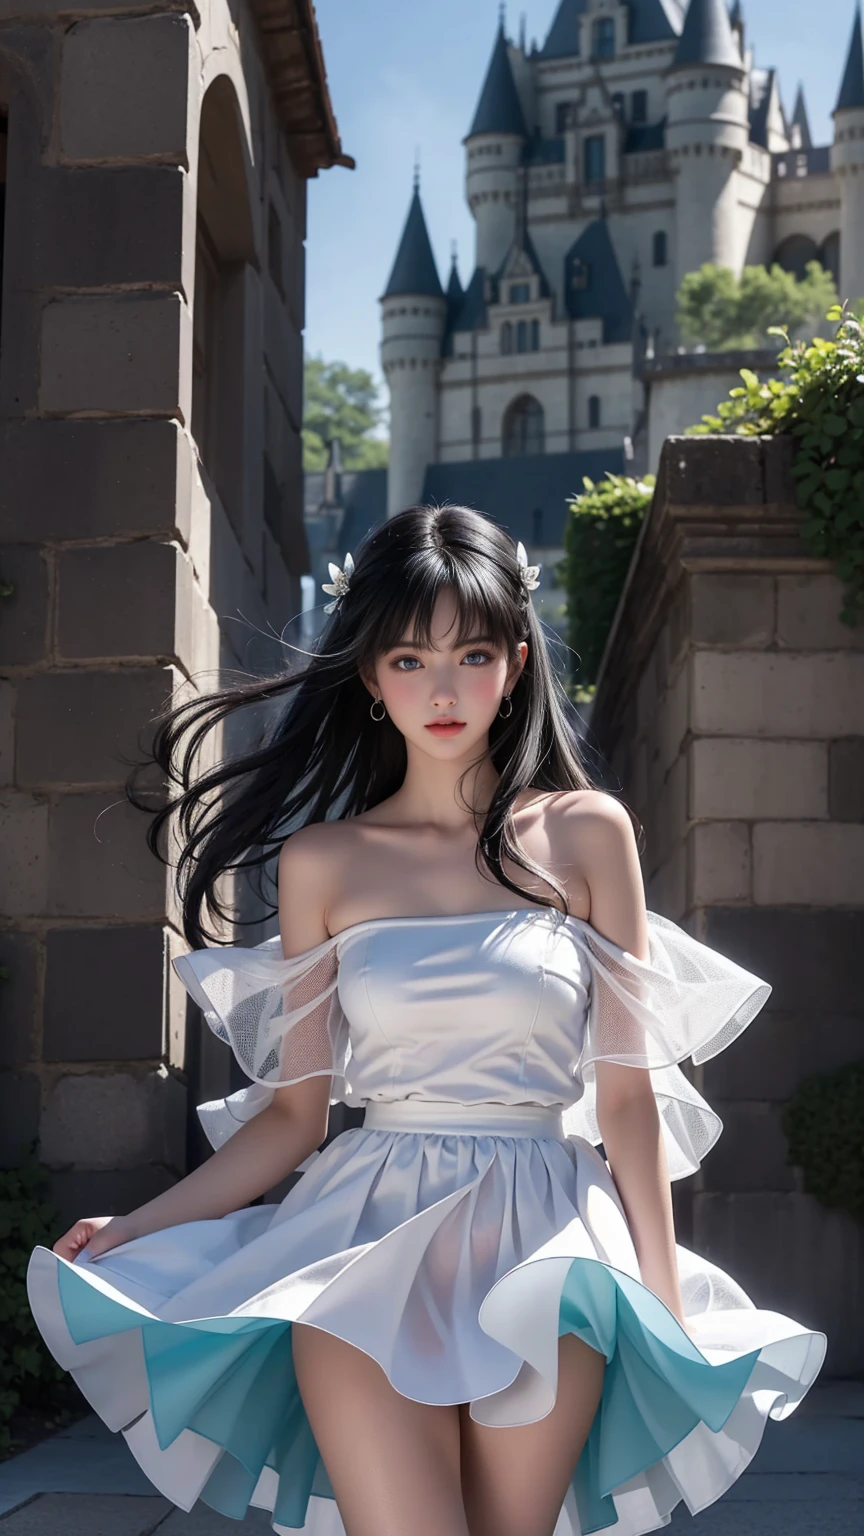 ((Girl standing in front of the wall of an old castle))、Double whirlwind pattern design clothing，Heterochromatic pupil，Silver Haired Girl，Free high resolution,Off the shoulder、Off the shoulder semi-transparent pure white dress in fluorescent colors、1 Girl、Look to the side、Beautiful Face、Beautiful Eyes、（Off the shoulder：1.2）、Upper Body、Shiny Hair、Glowing Skin、 Reduce glare、Adjusted finger proportions、escrow、ass pov、Dynamic Angle、(((Master Parts)))、(((Highest quality)))、(((Super-detailed))) detailed）、（An illustration）、（Detailed light）、（Very delicate and beautiful）、dramatic_Shadow、Ray_Tracking、reflection、 Ultra-high resolution、((Colorful and black hair mesh girls))、 Her hair flutters in the wind、(big deep blue eyes)、Black-haired woman、 Sparkling butterfly、Black-haired woman、Points of light around the woman、Magical Aura、Green dot、About Auras Nature、超Magical AuraBlack-haired woman,((Off the shoulder semi-transparent white dress:1.3))、(Sleevelesy skirt is flying up in the wind)),((An old European castle looms in the distance)),((White panties are visible)),